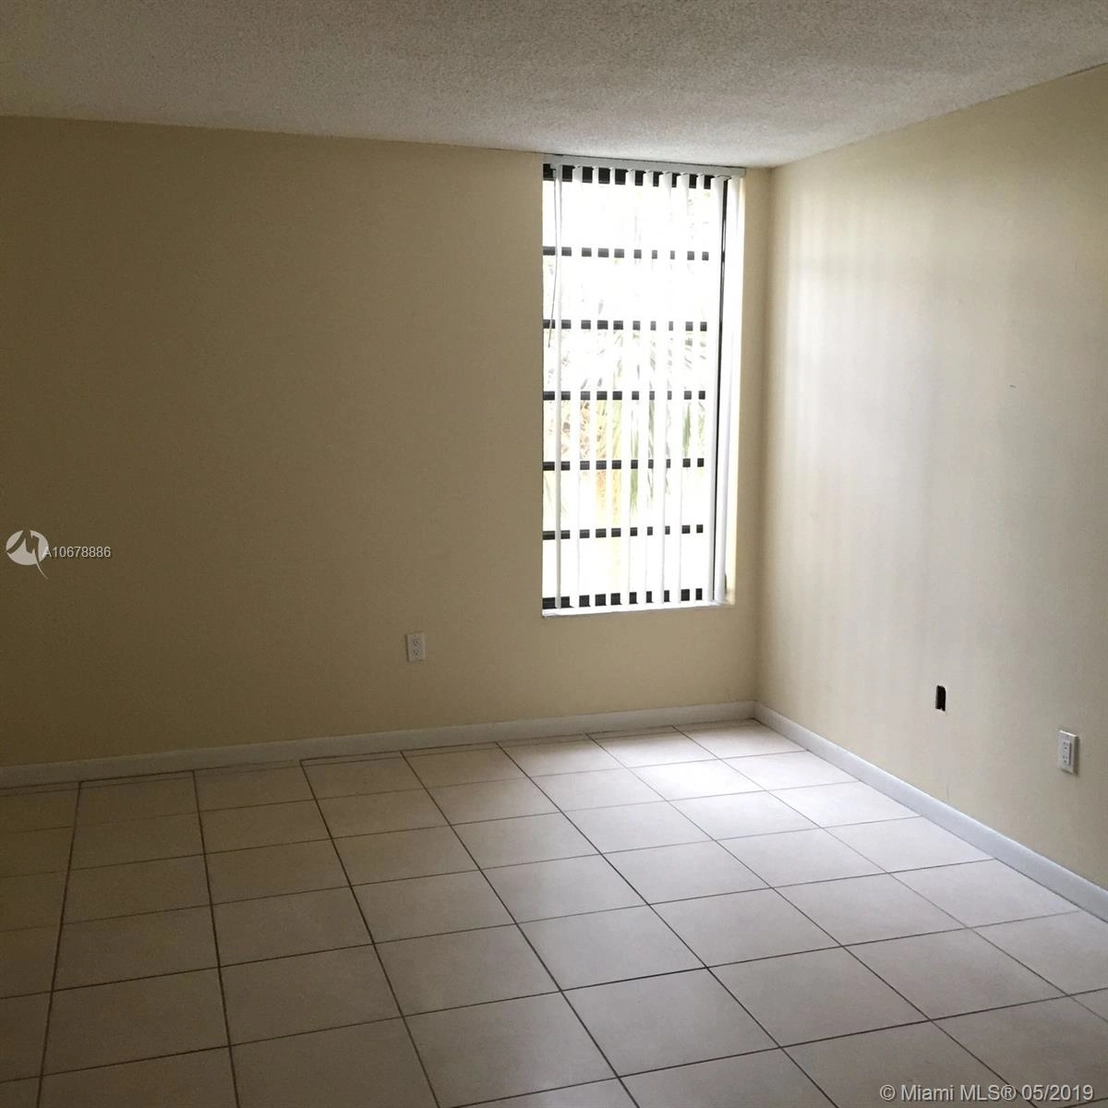 Photo of Unit 303 at 9686 Fontainebleau Blvd